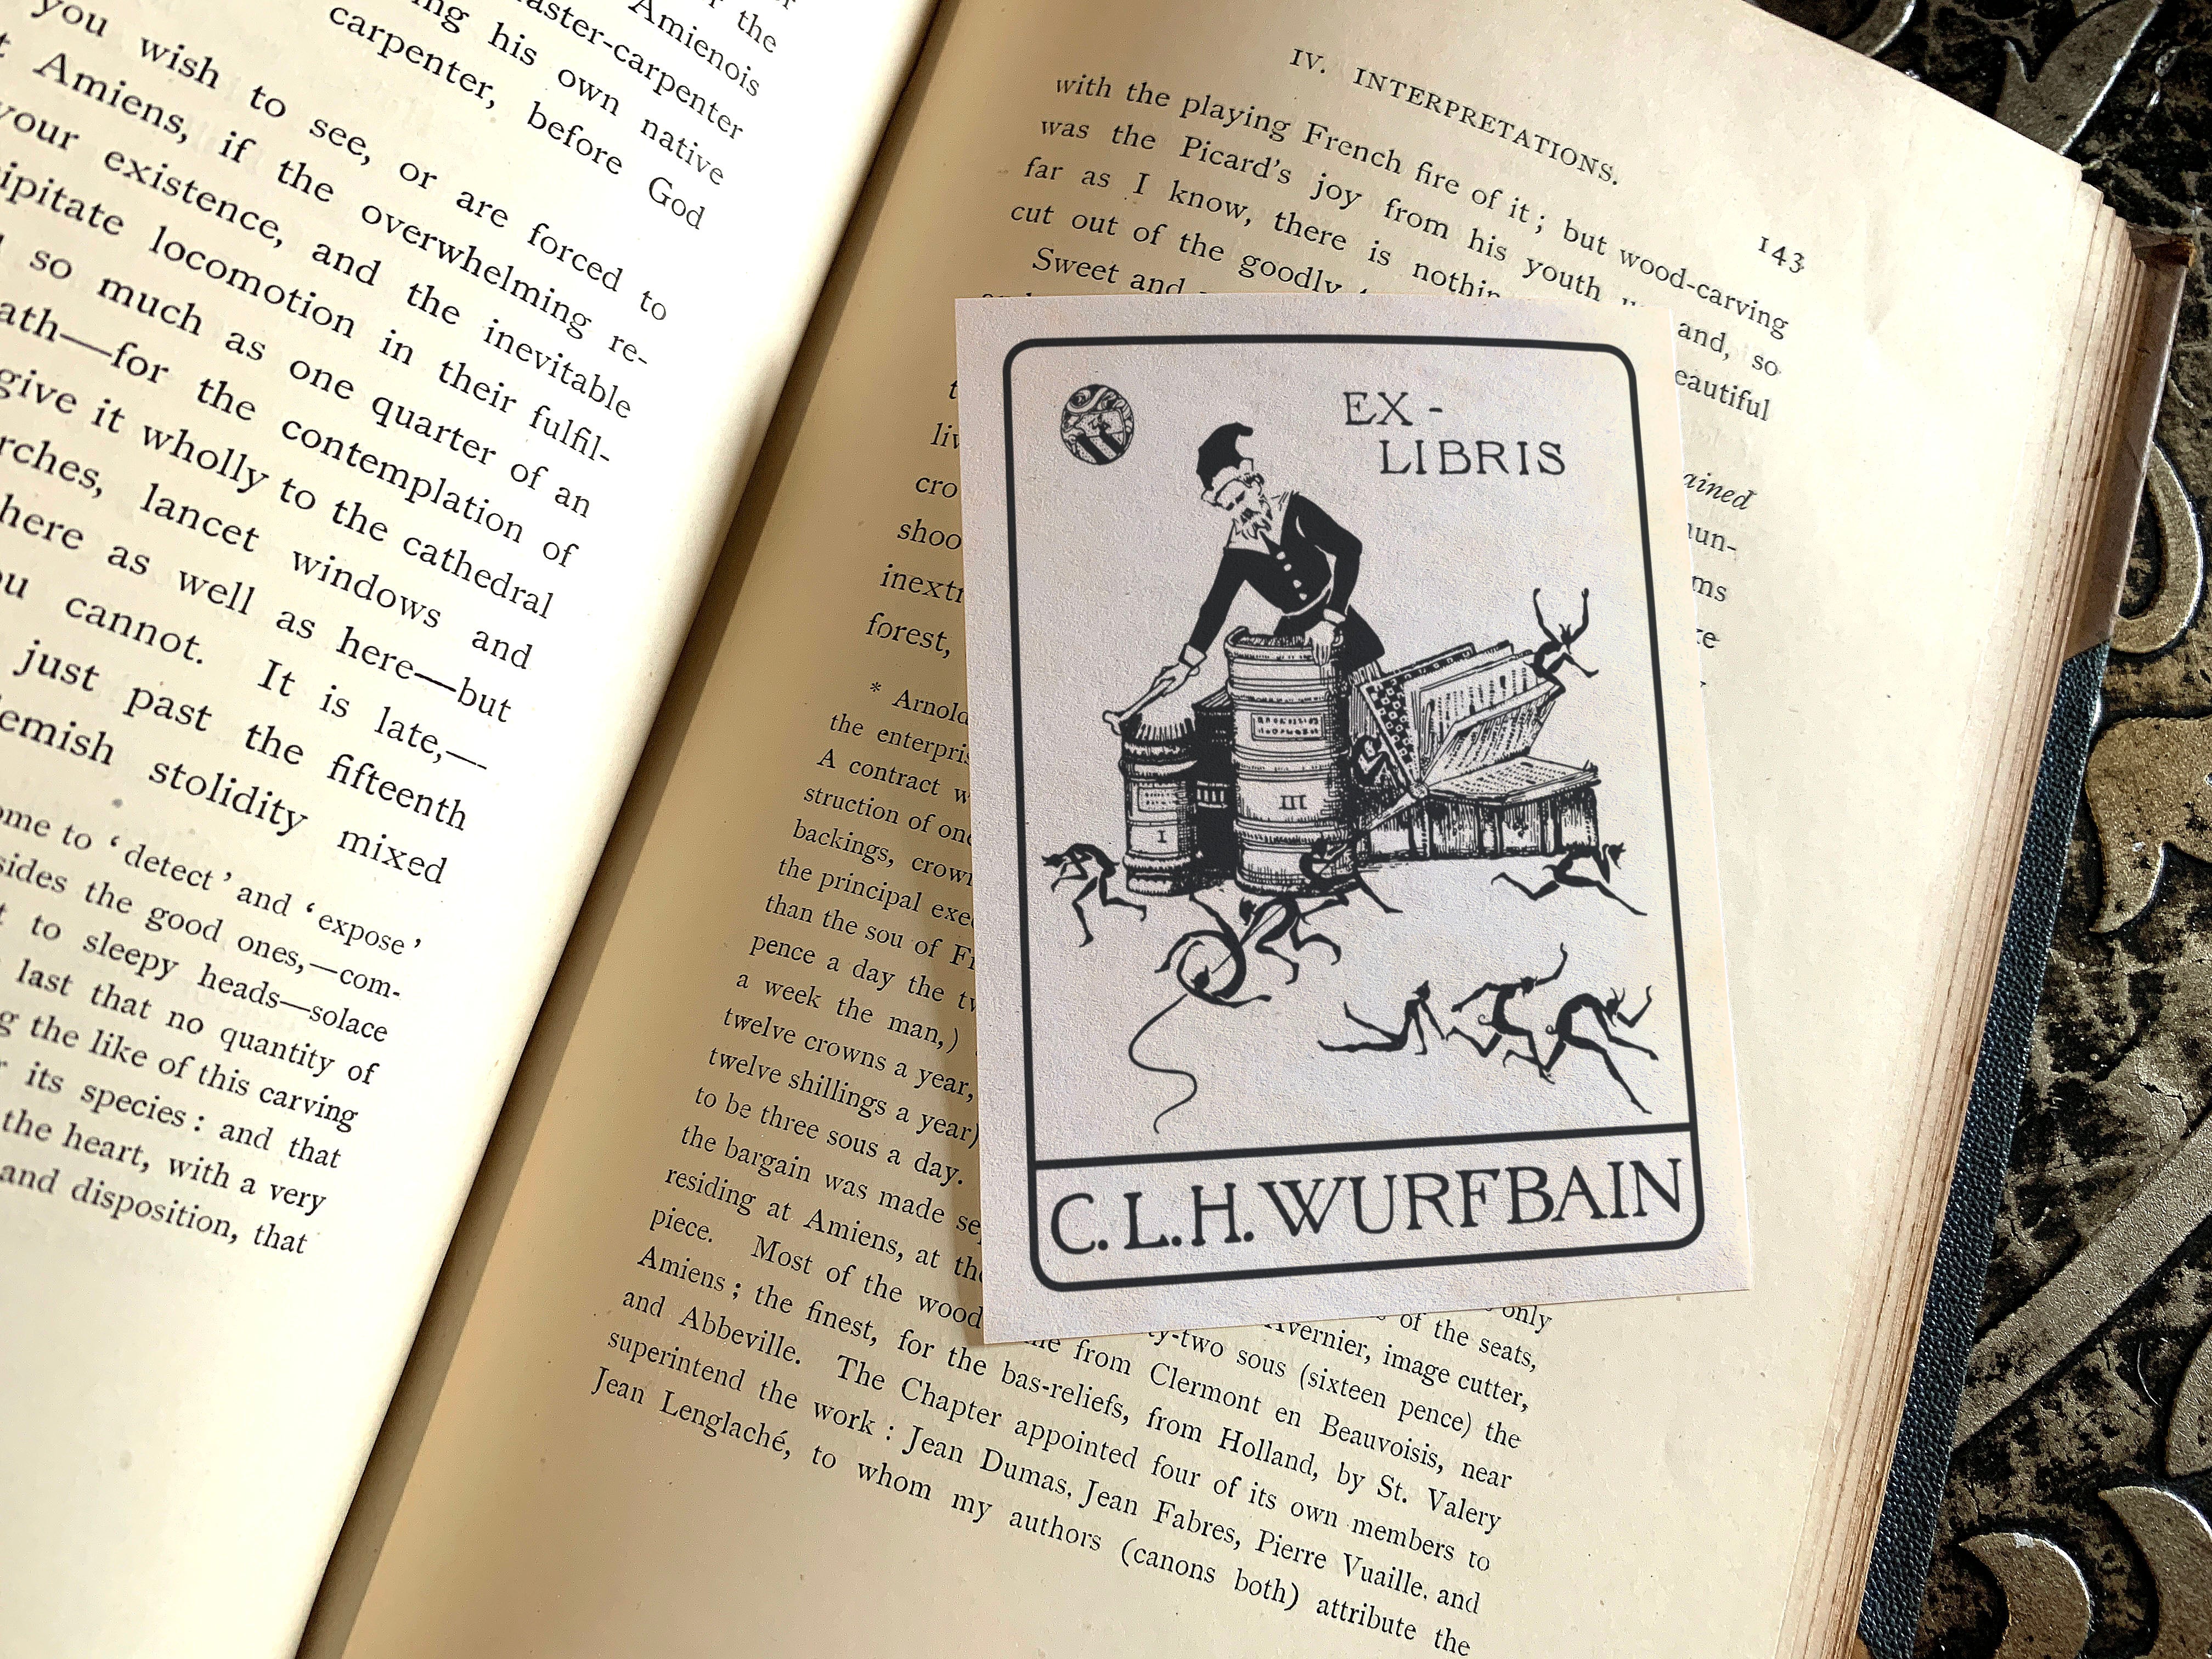 WURFBAIN CUSTOM ORDER, Personalized Ex-Libris Bookplates, Crafted on Traditional Gummed Paper, 4in x 3in, 450 Pieces